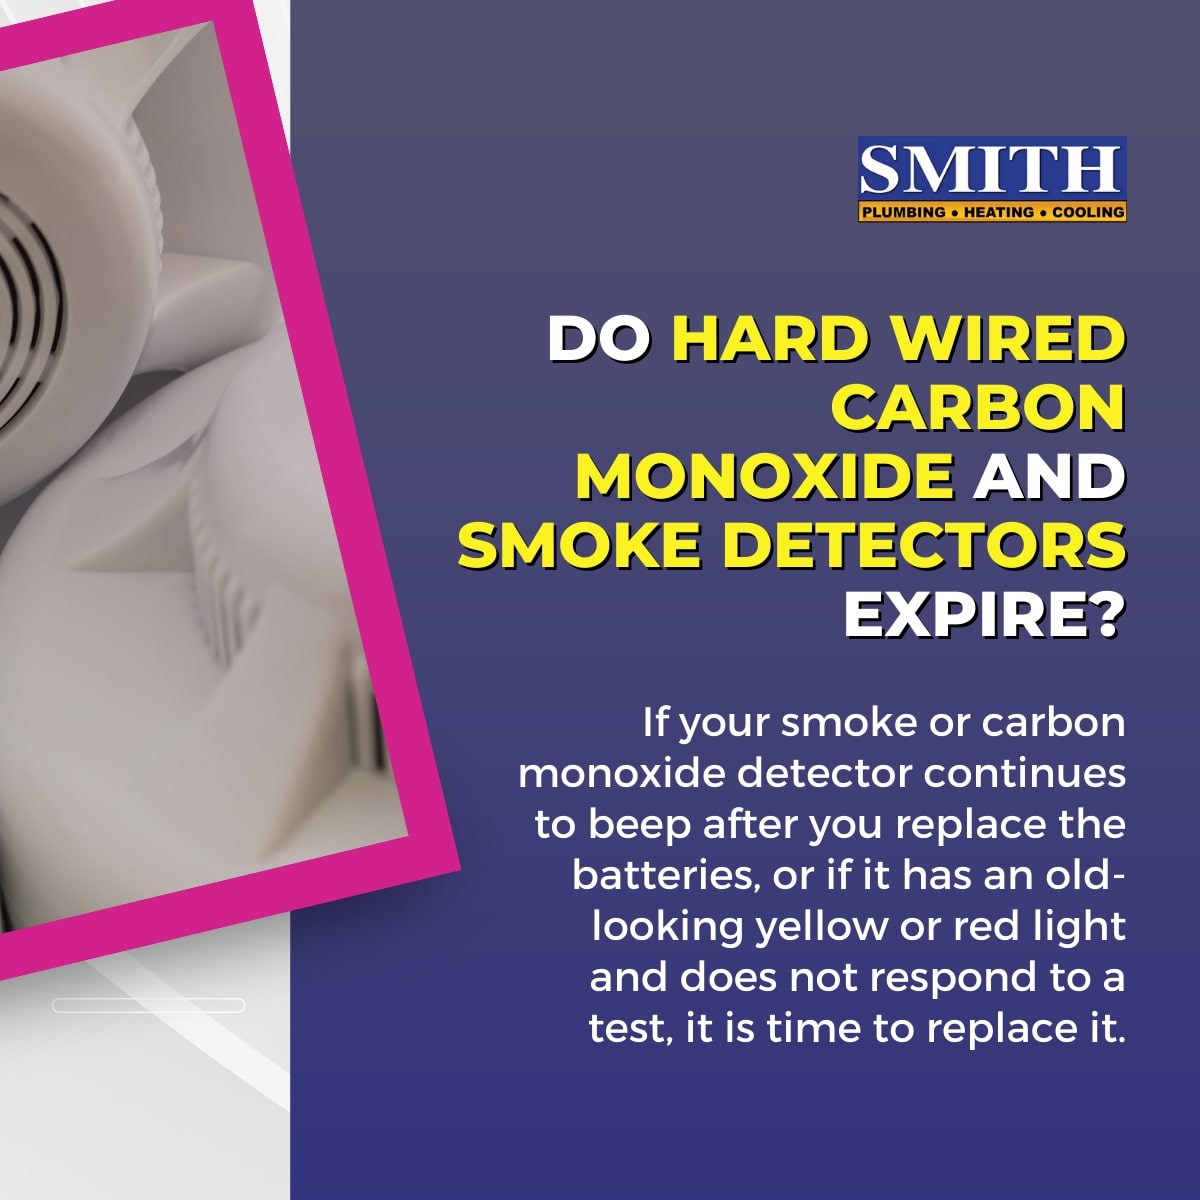 Do hard wired carbon monoxide and smoke detectors expire?